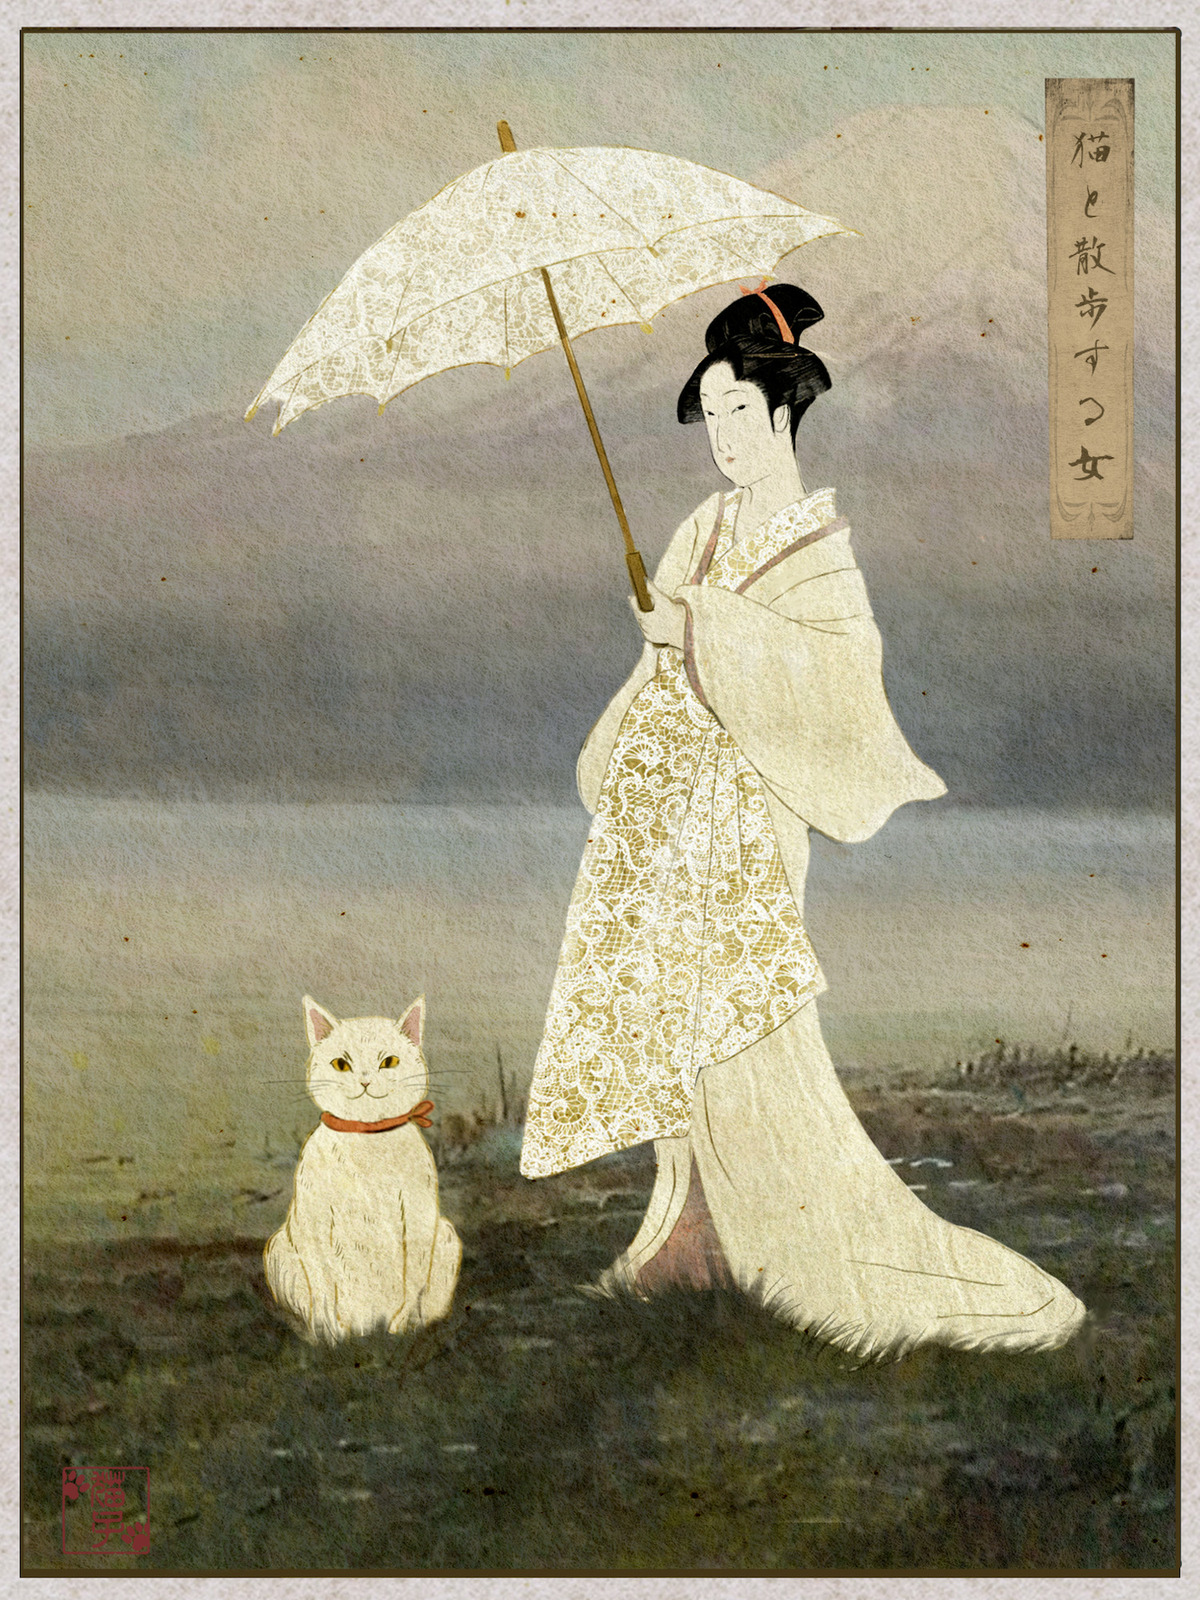 A woman taking a walk with a cat